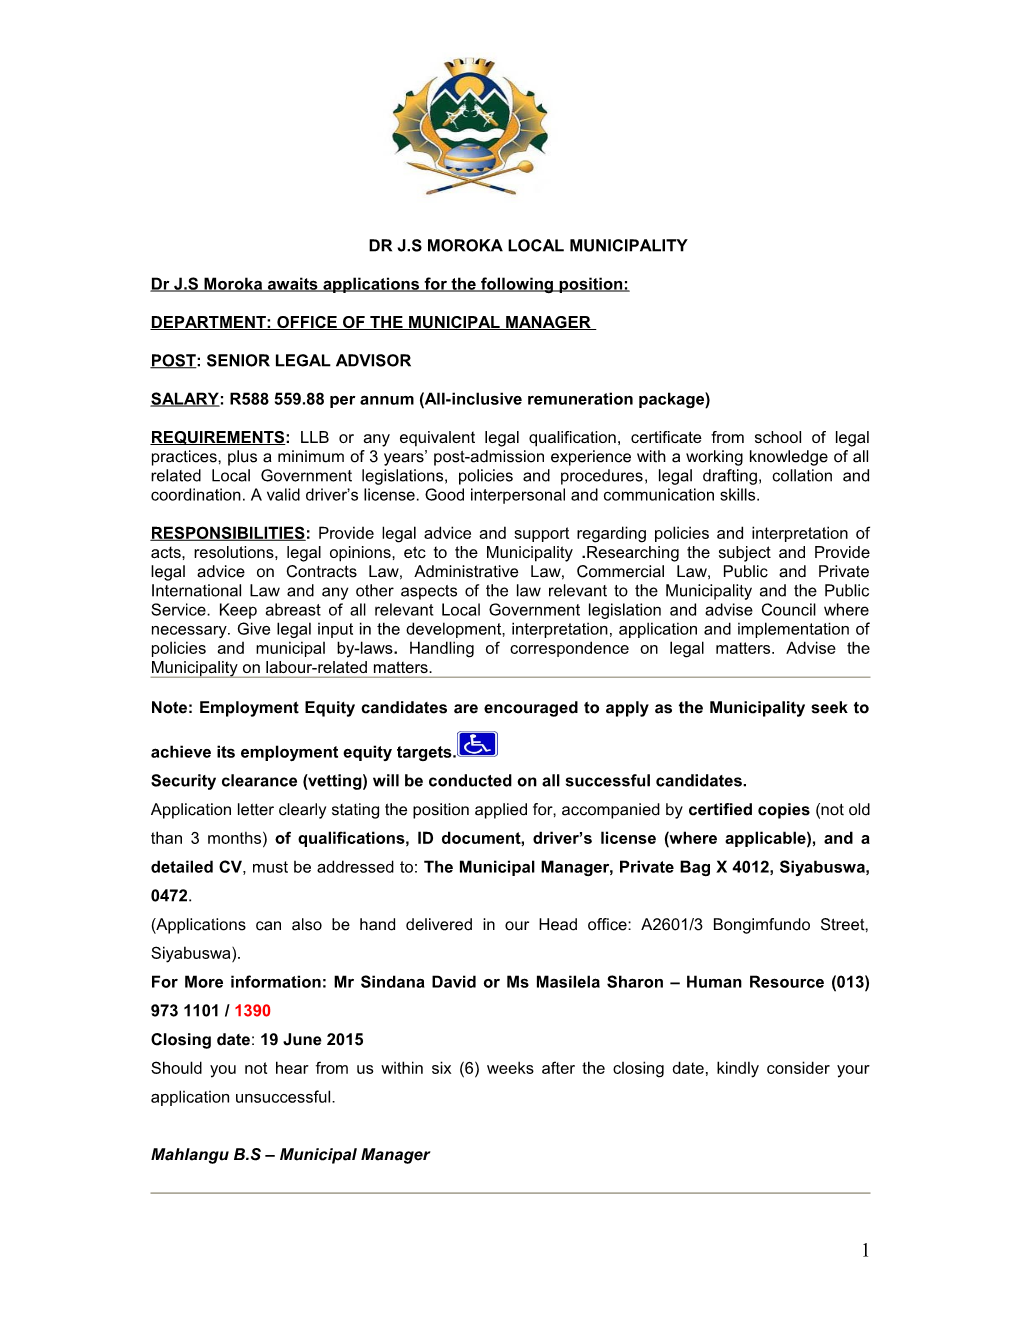 Dr J.S Moroka Awaits Applications for the Following Position